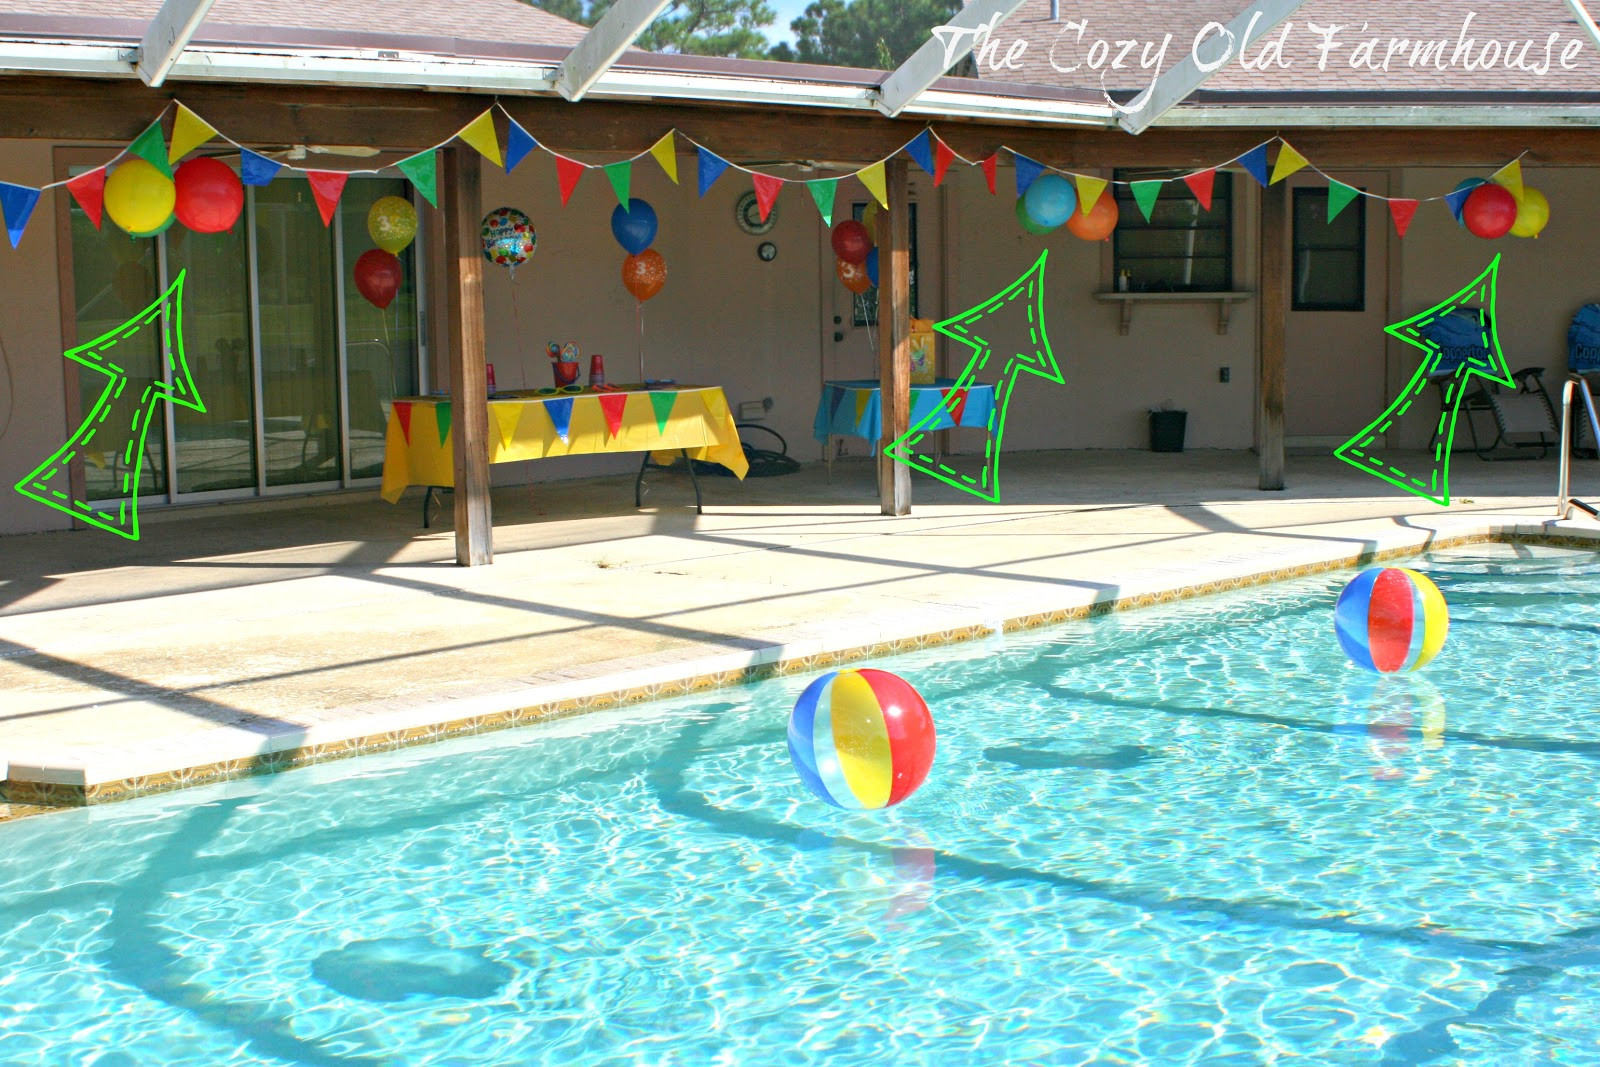 Swim Pool Party Ideas
 The Cozy Old "Farmhouse" Simple and Bud Friendly Pool